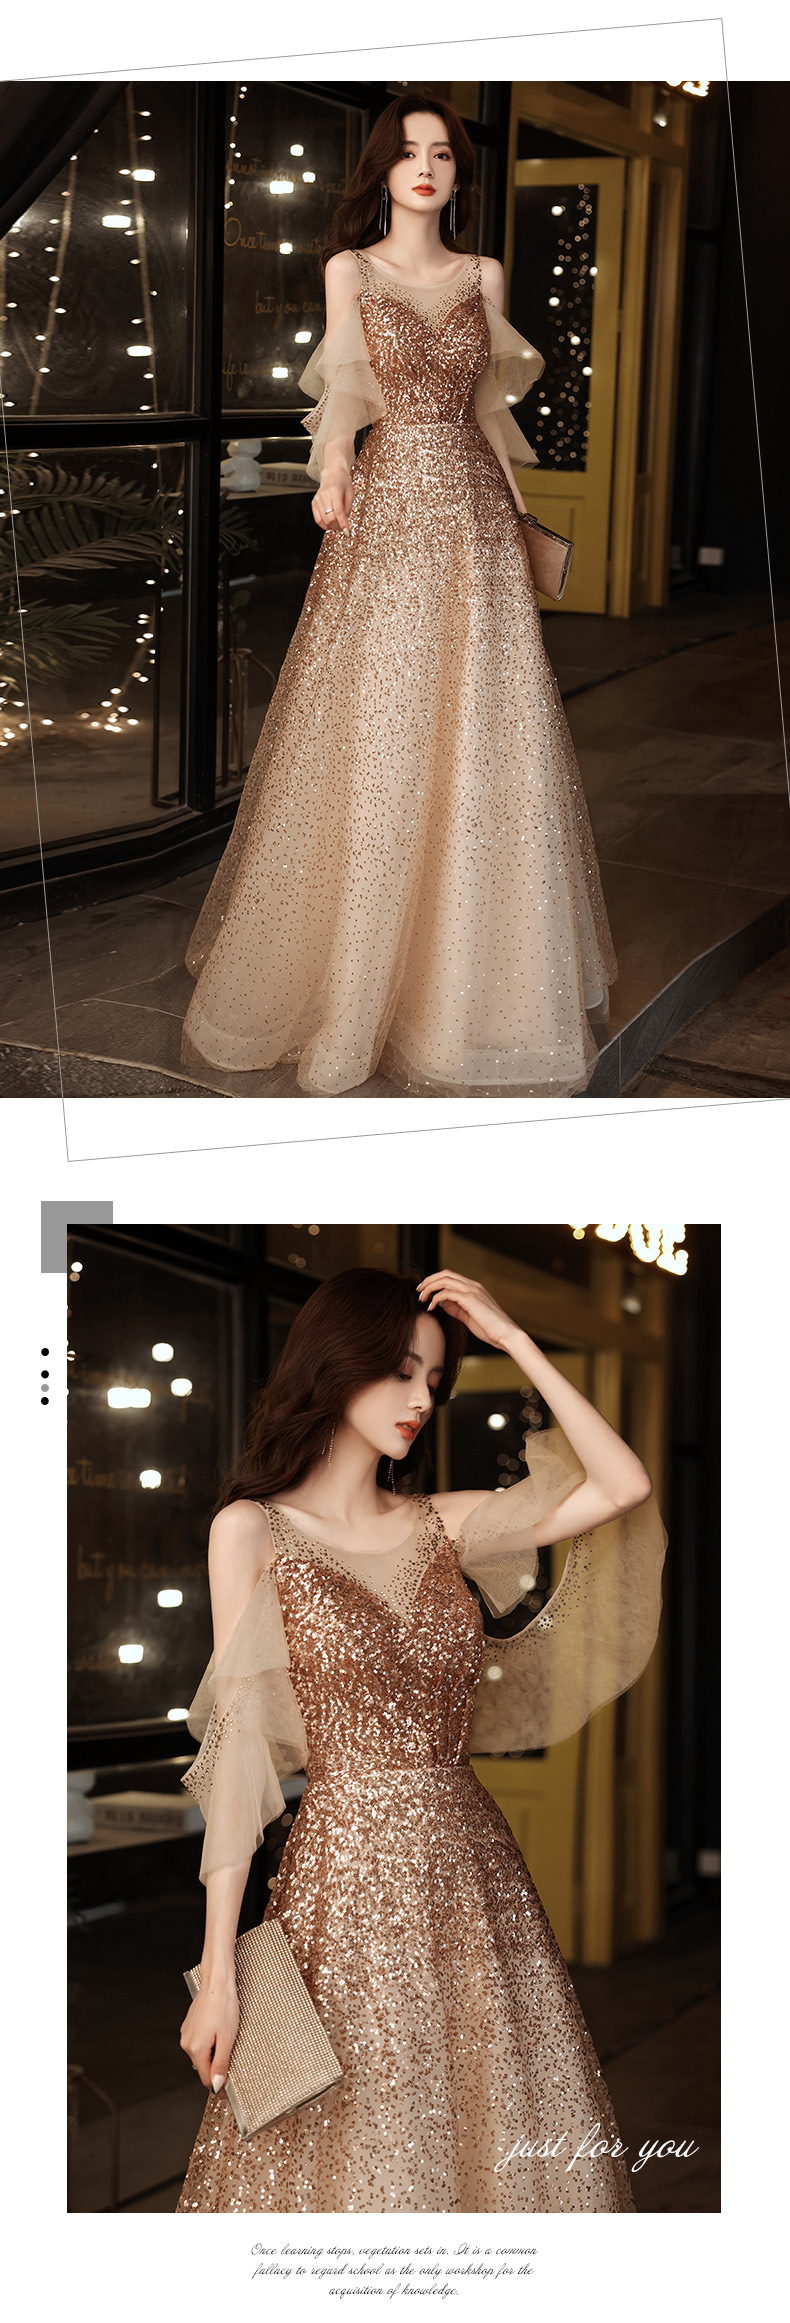 Elegant-Cocktail-Party-Dress-Evening-Gown-for-Prom-and-Homecoming12.jpg